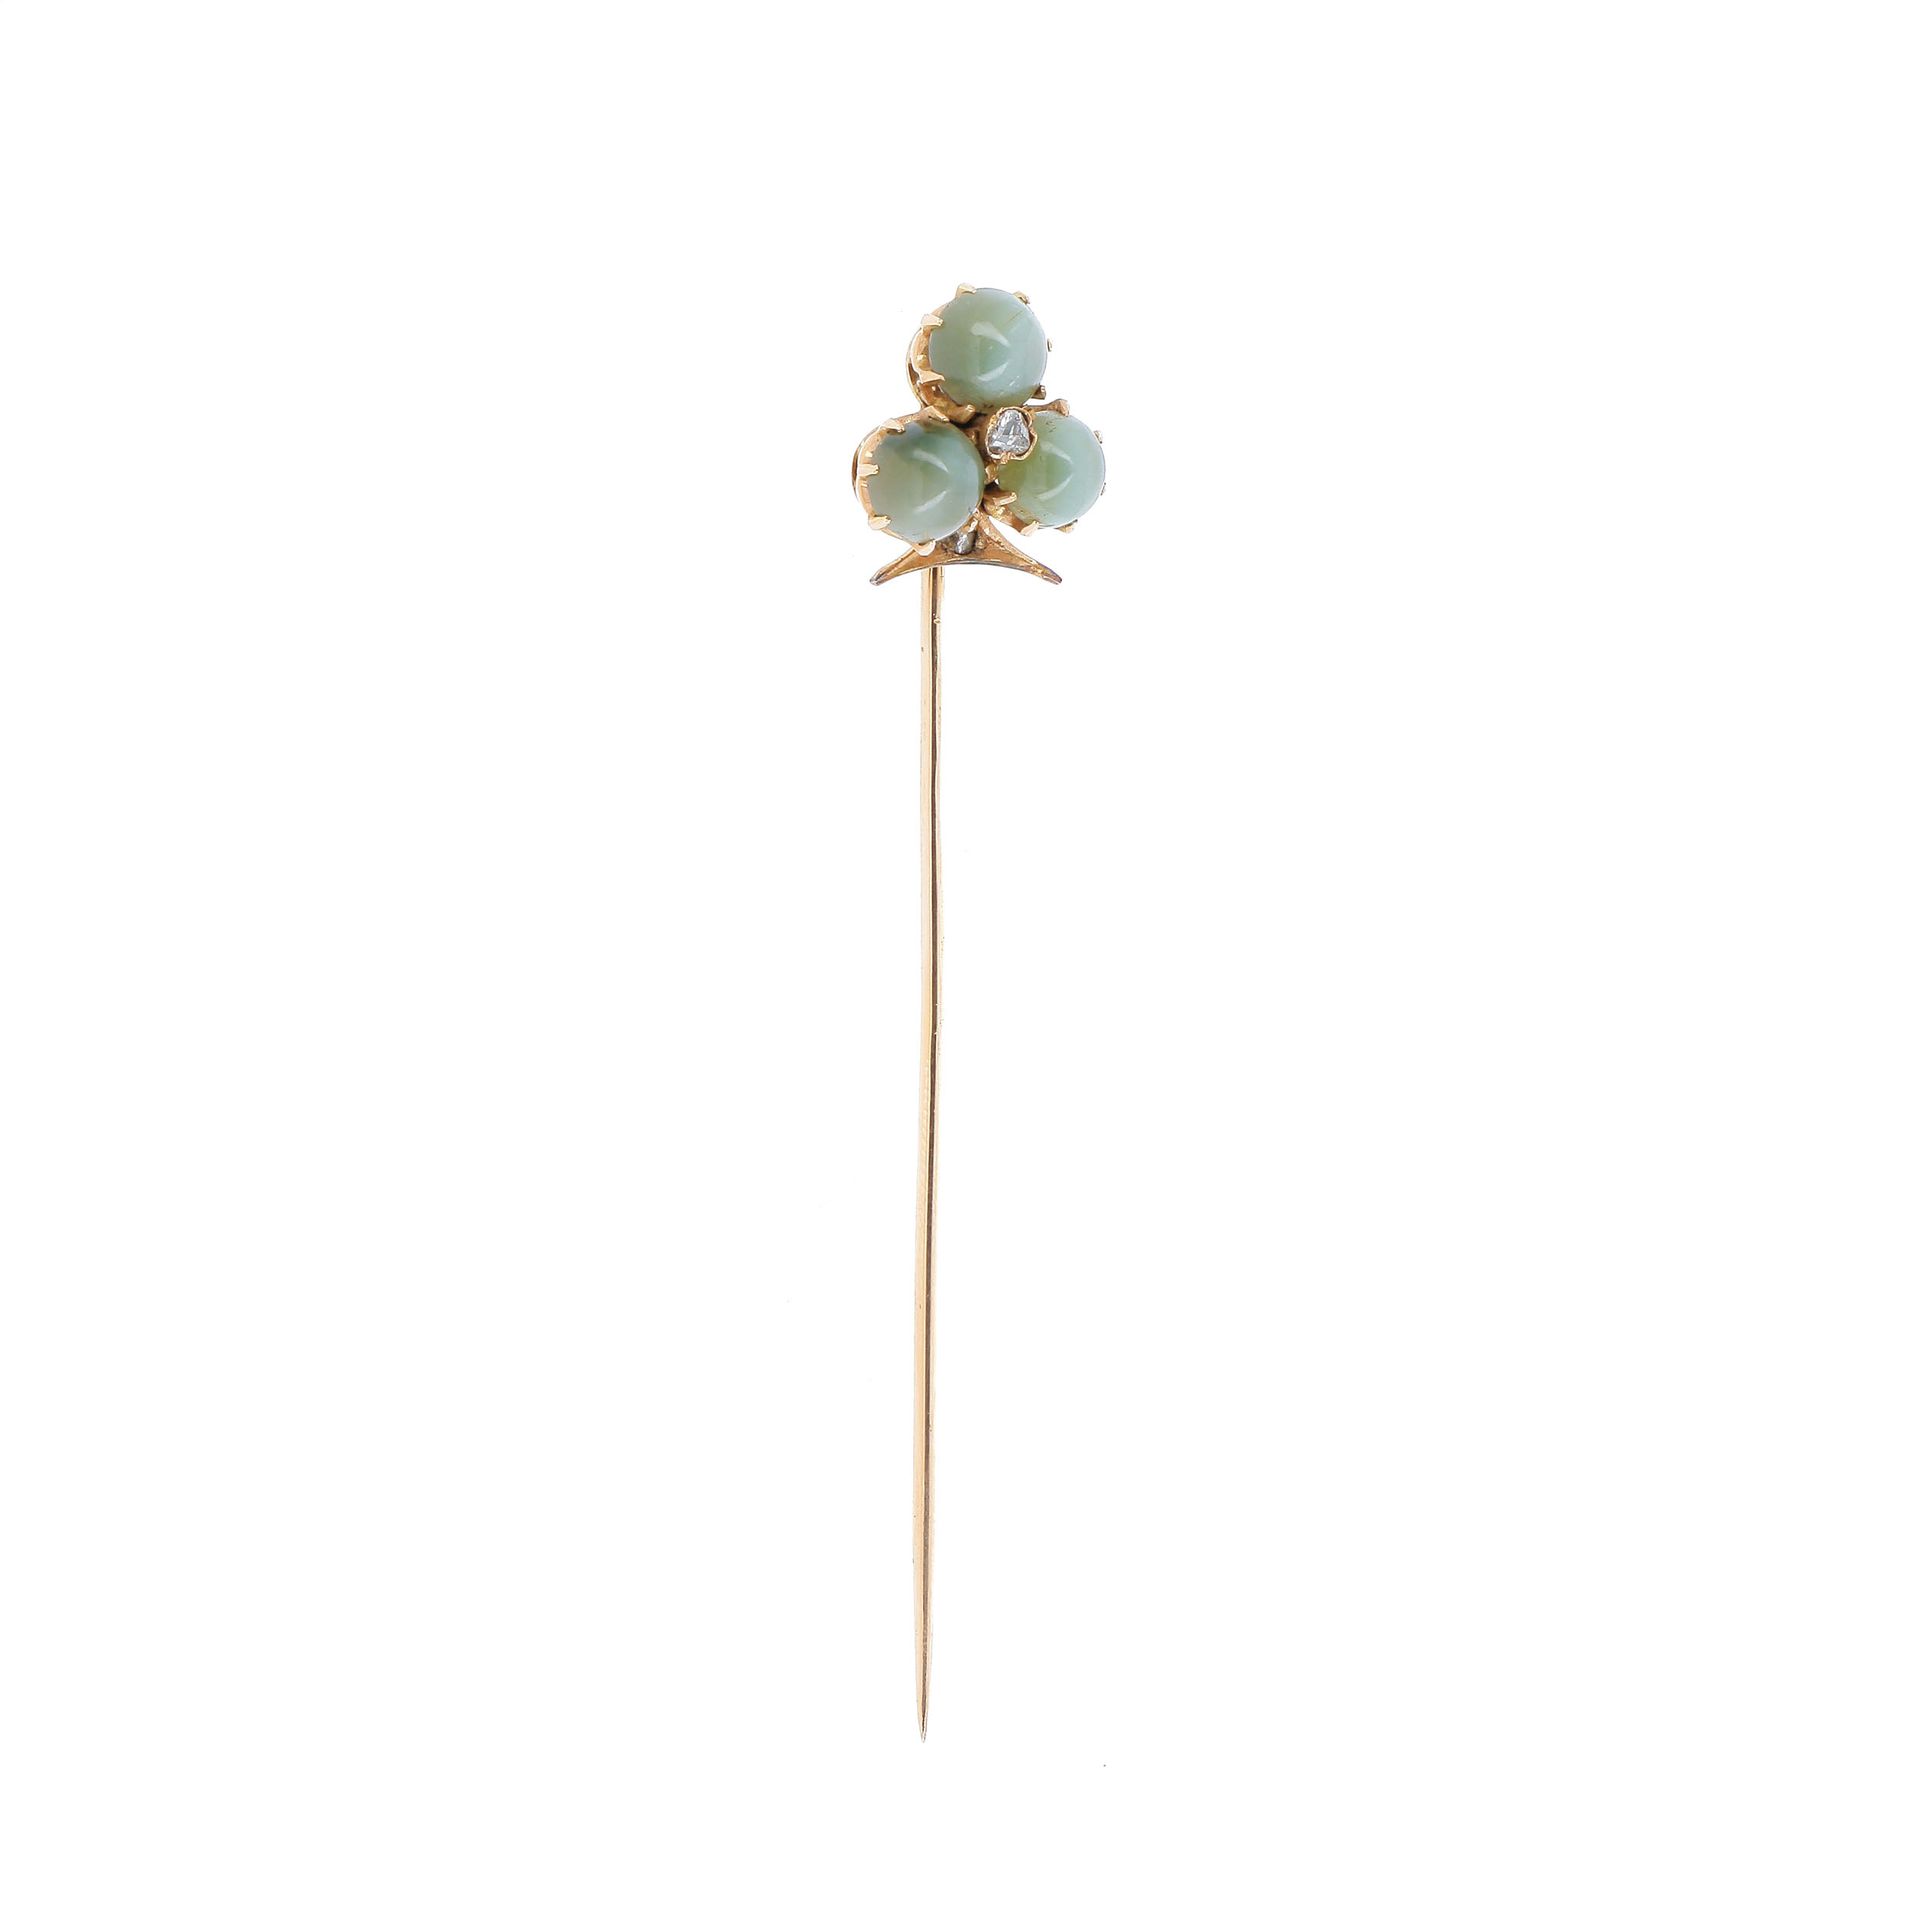 Null TREFLE TIE PIN

in pink gold, set with moonstone cabochons and rose-cut dia&hellip;